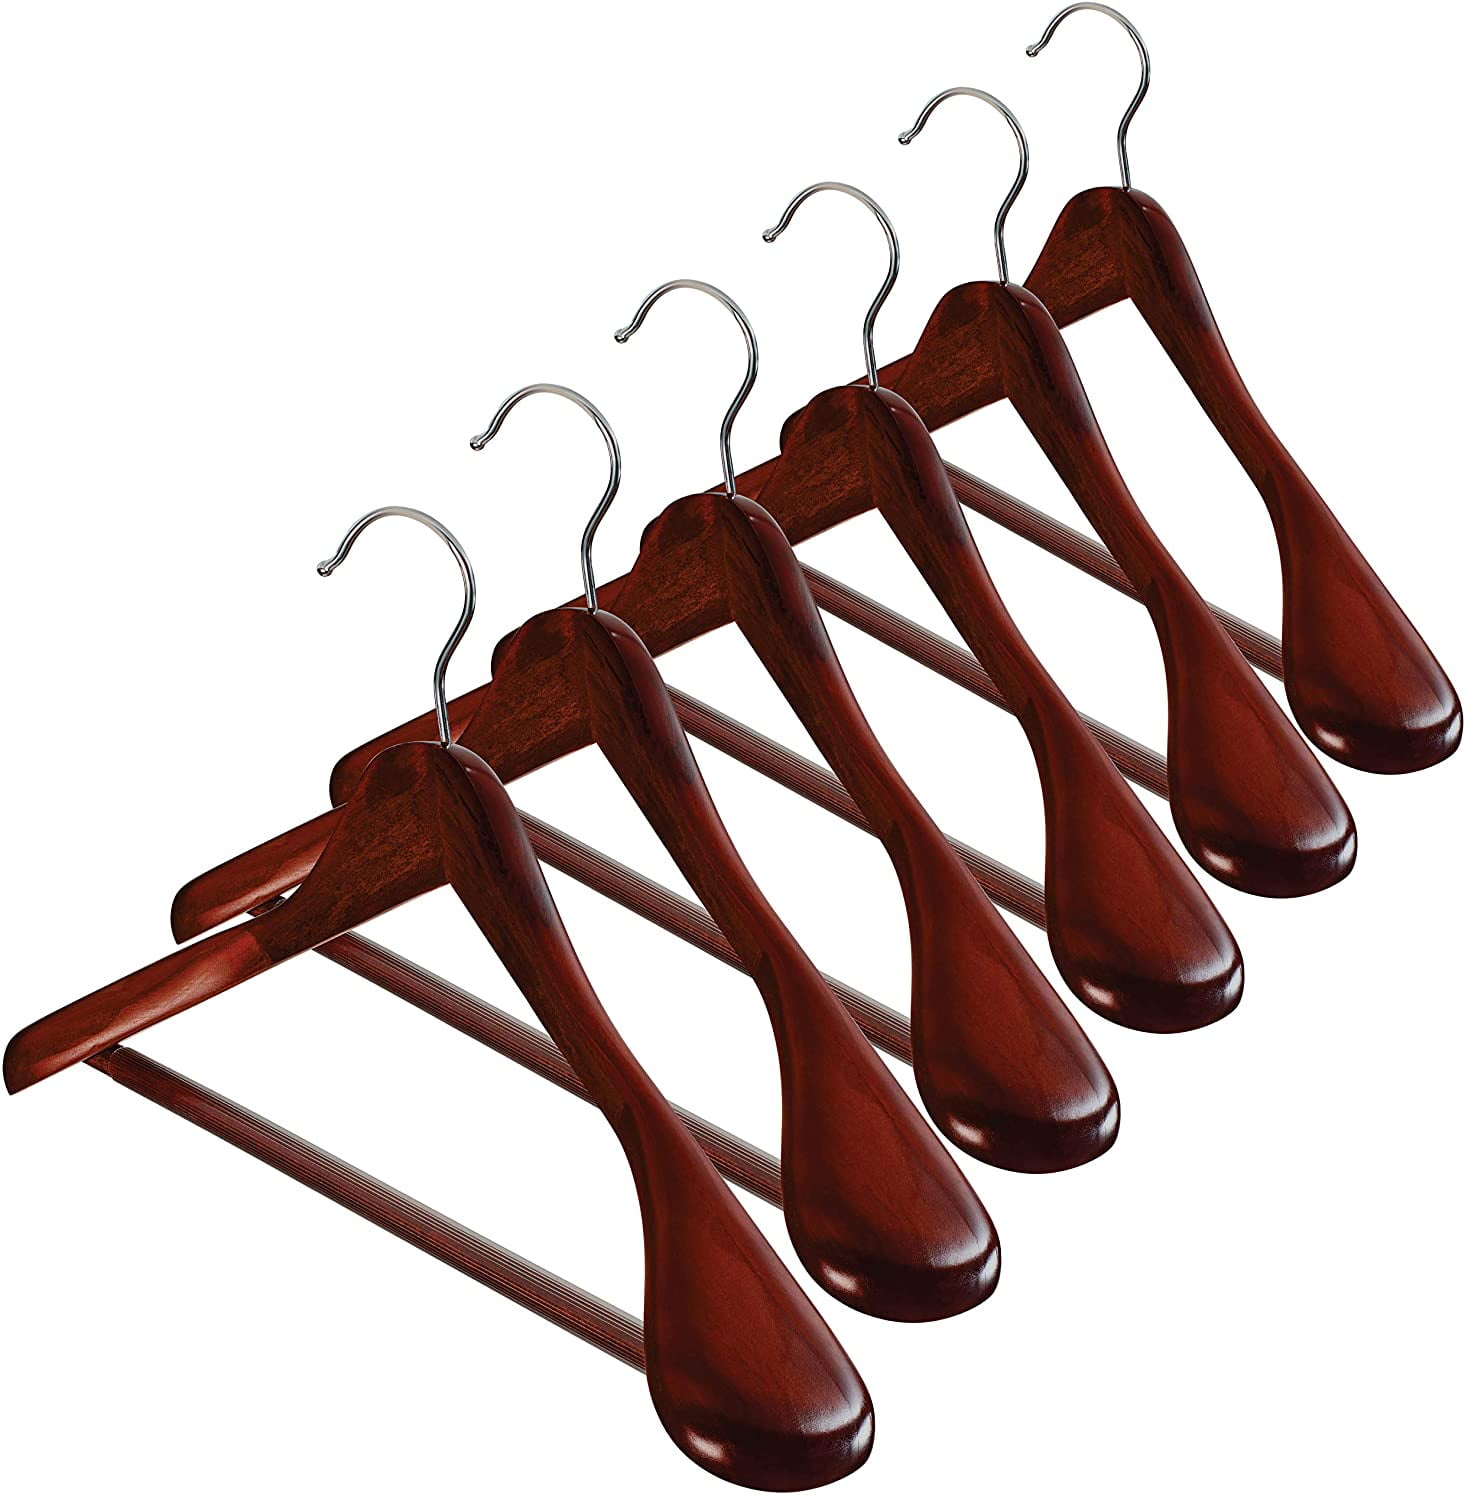  Big Boy Bamboo 6-Pack Adjustable Heavy Duty Extra-Wide Arm  15-23 Bumpless Clothes Hangers with Swivel Hooks, Perfect for Big & Tall  Coats, Jackets, Dresses, Shirts, Pants : Home & Kitchen